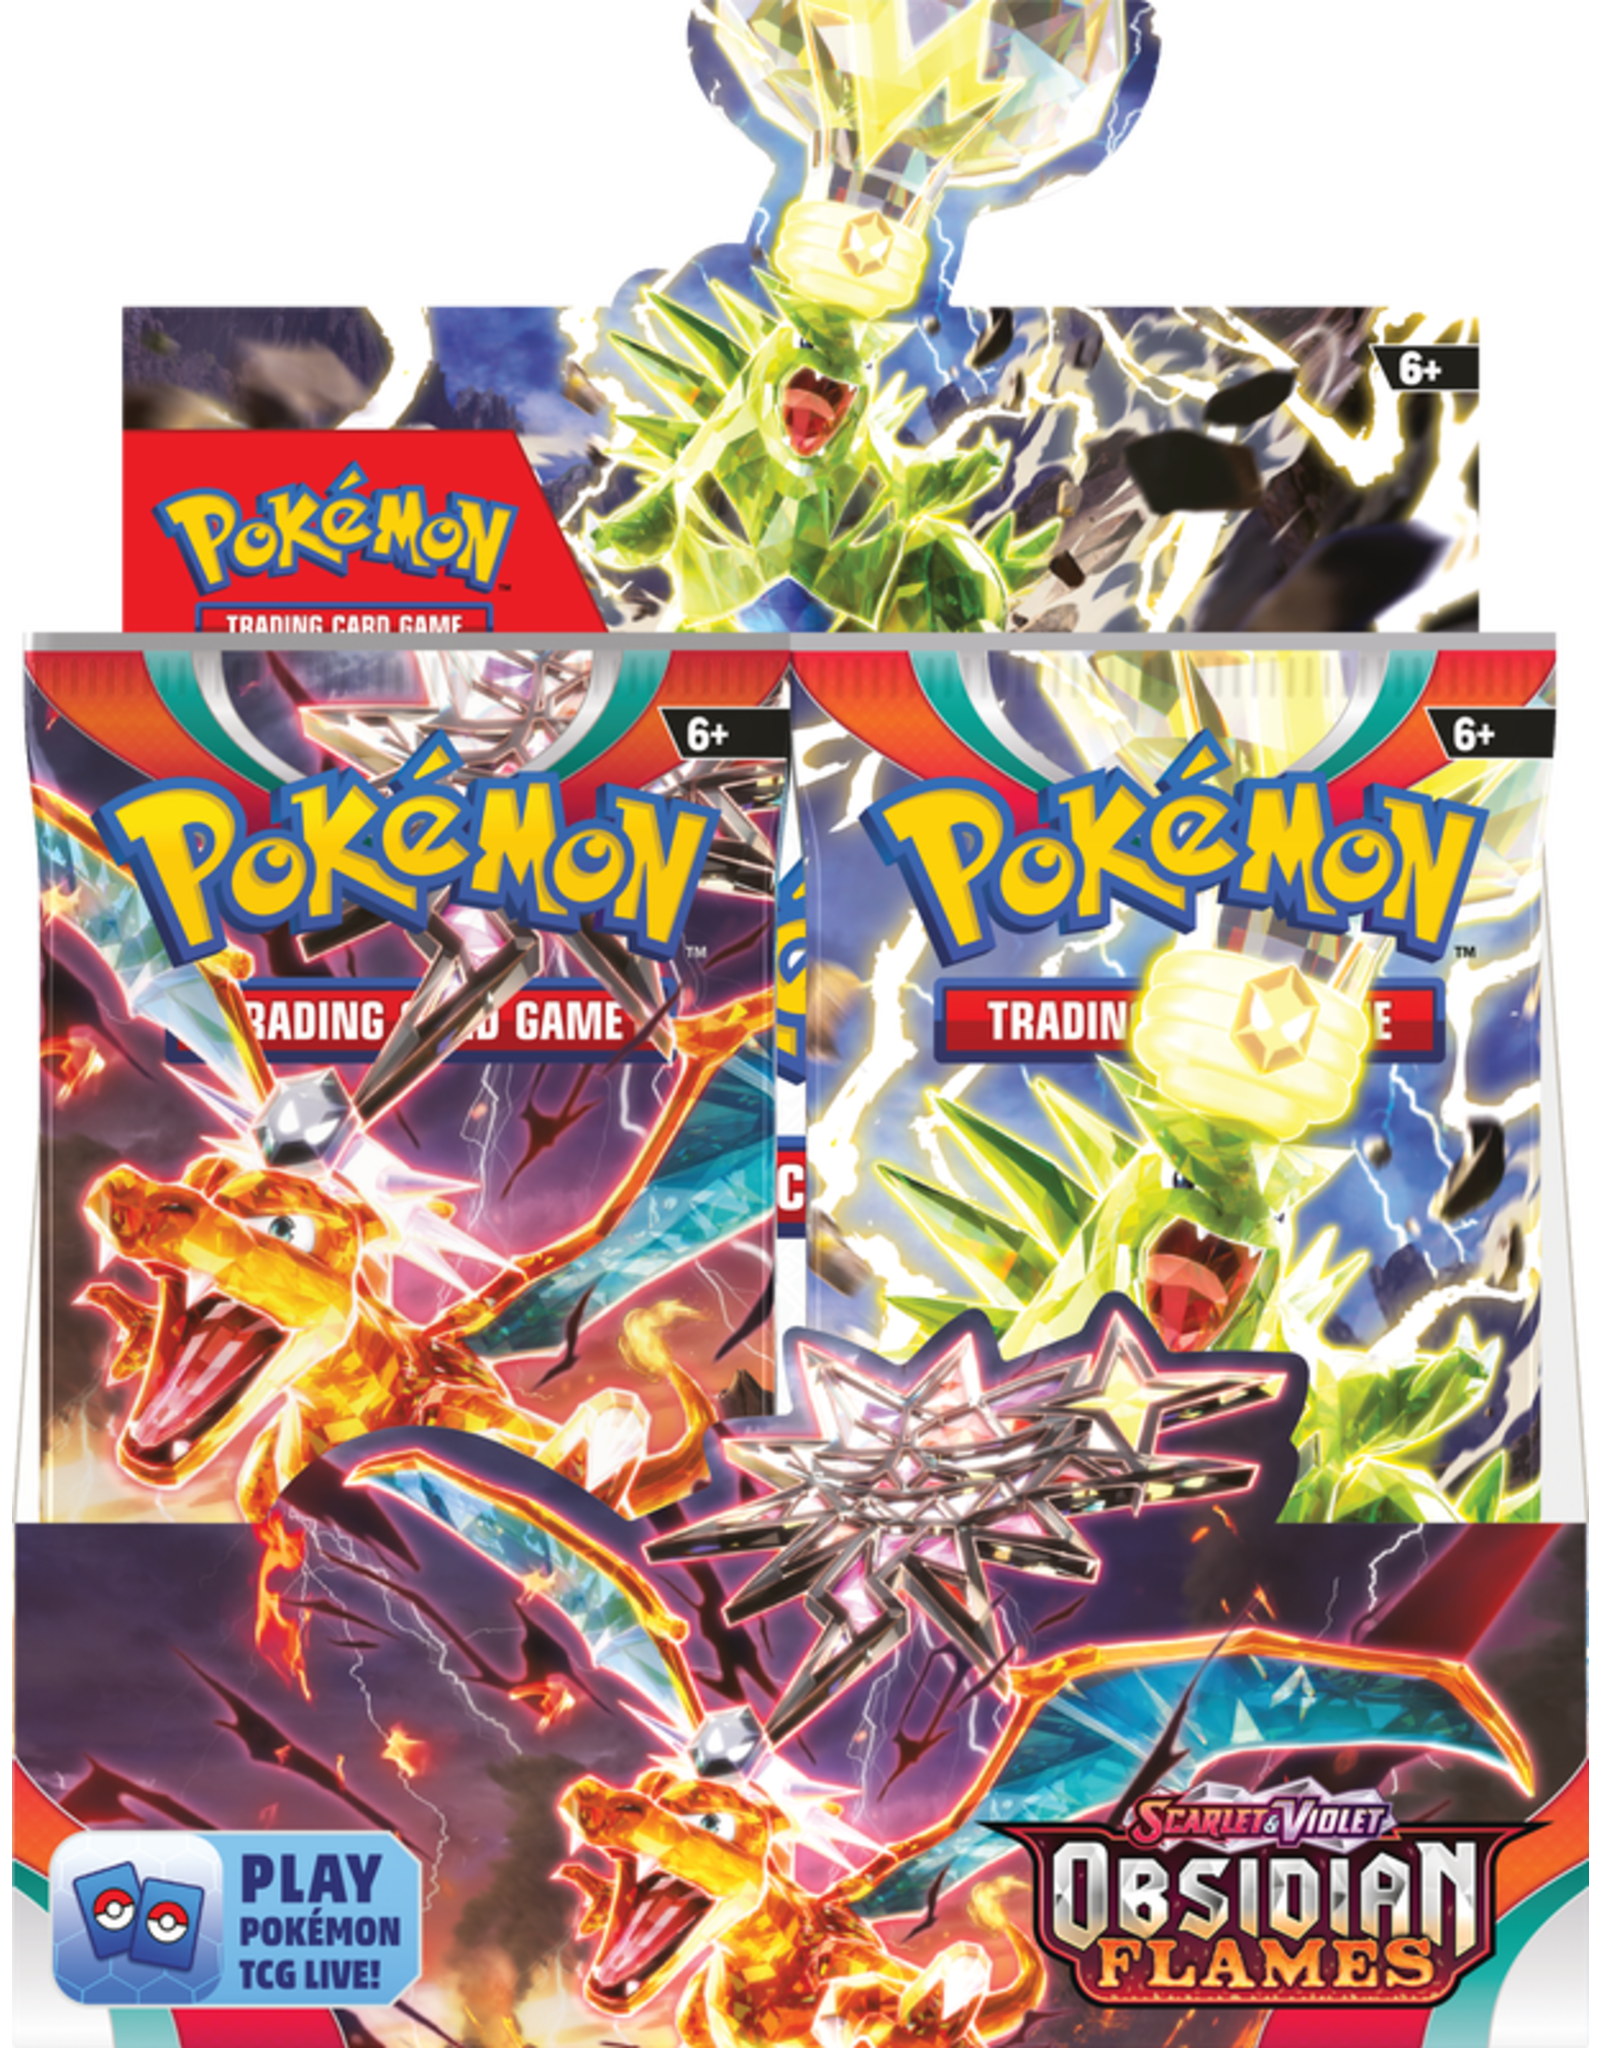 The Pokemon Company Pokémon Trading Card Game - Obsidian Flames Booster Pack